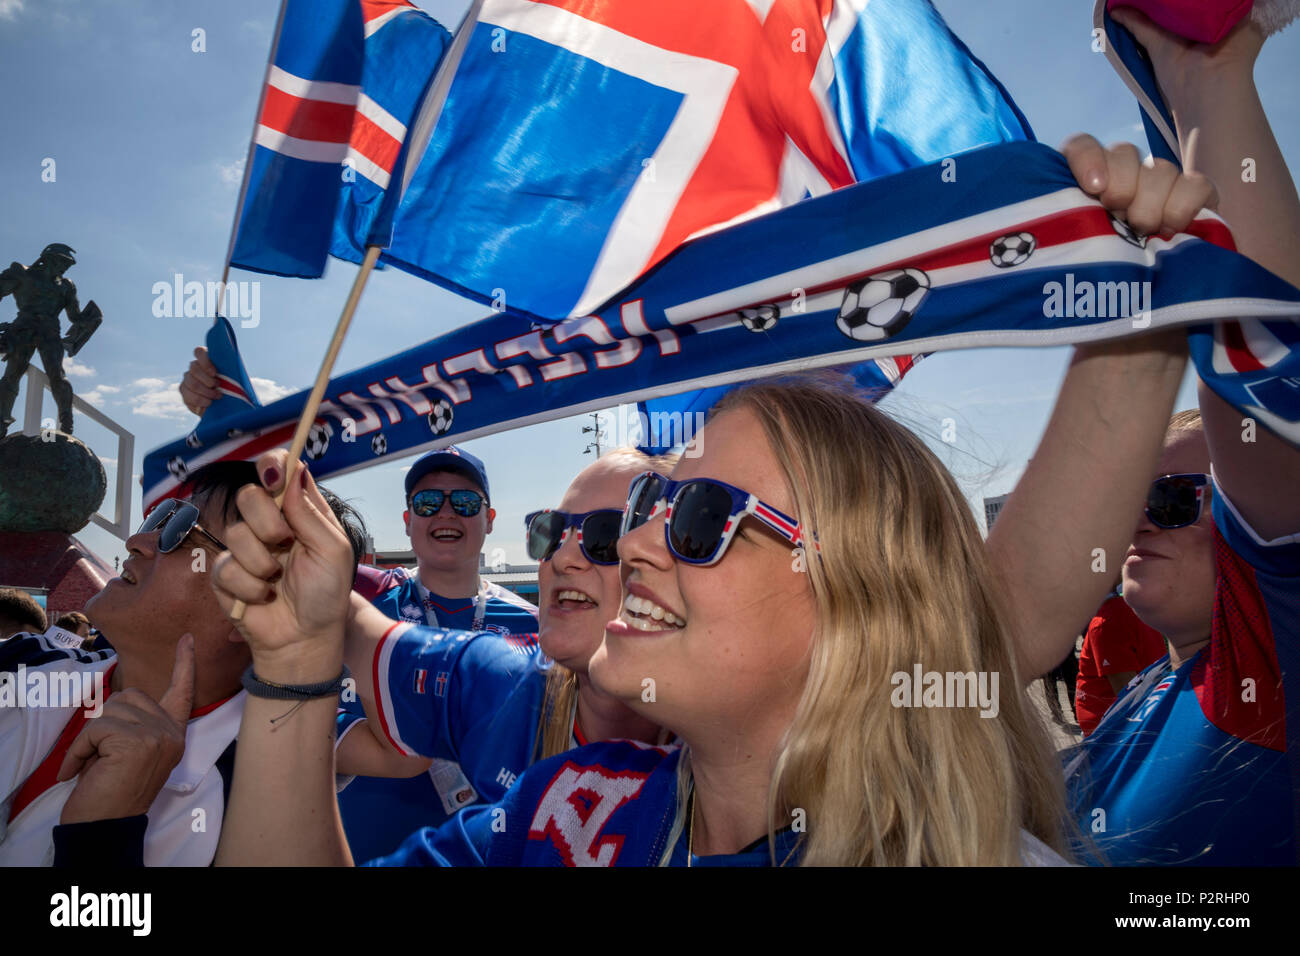 Moscow, Russia. 16th June, 2018. Iceland's fans before starts the 2018 FIFA World Cup Russia Group D match between Argentina and Iceland at the Spartak Stadium in Moscow, Russia Credit: Nikolay Vinokurov/Alamy Live News Stock Photo